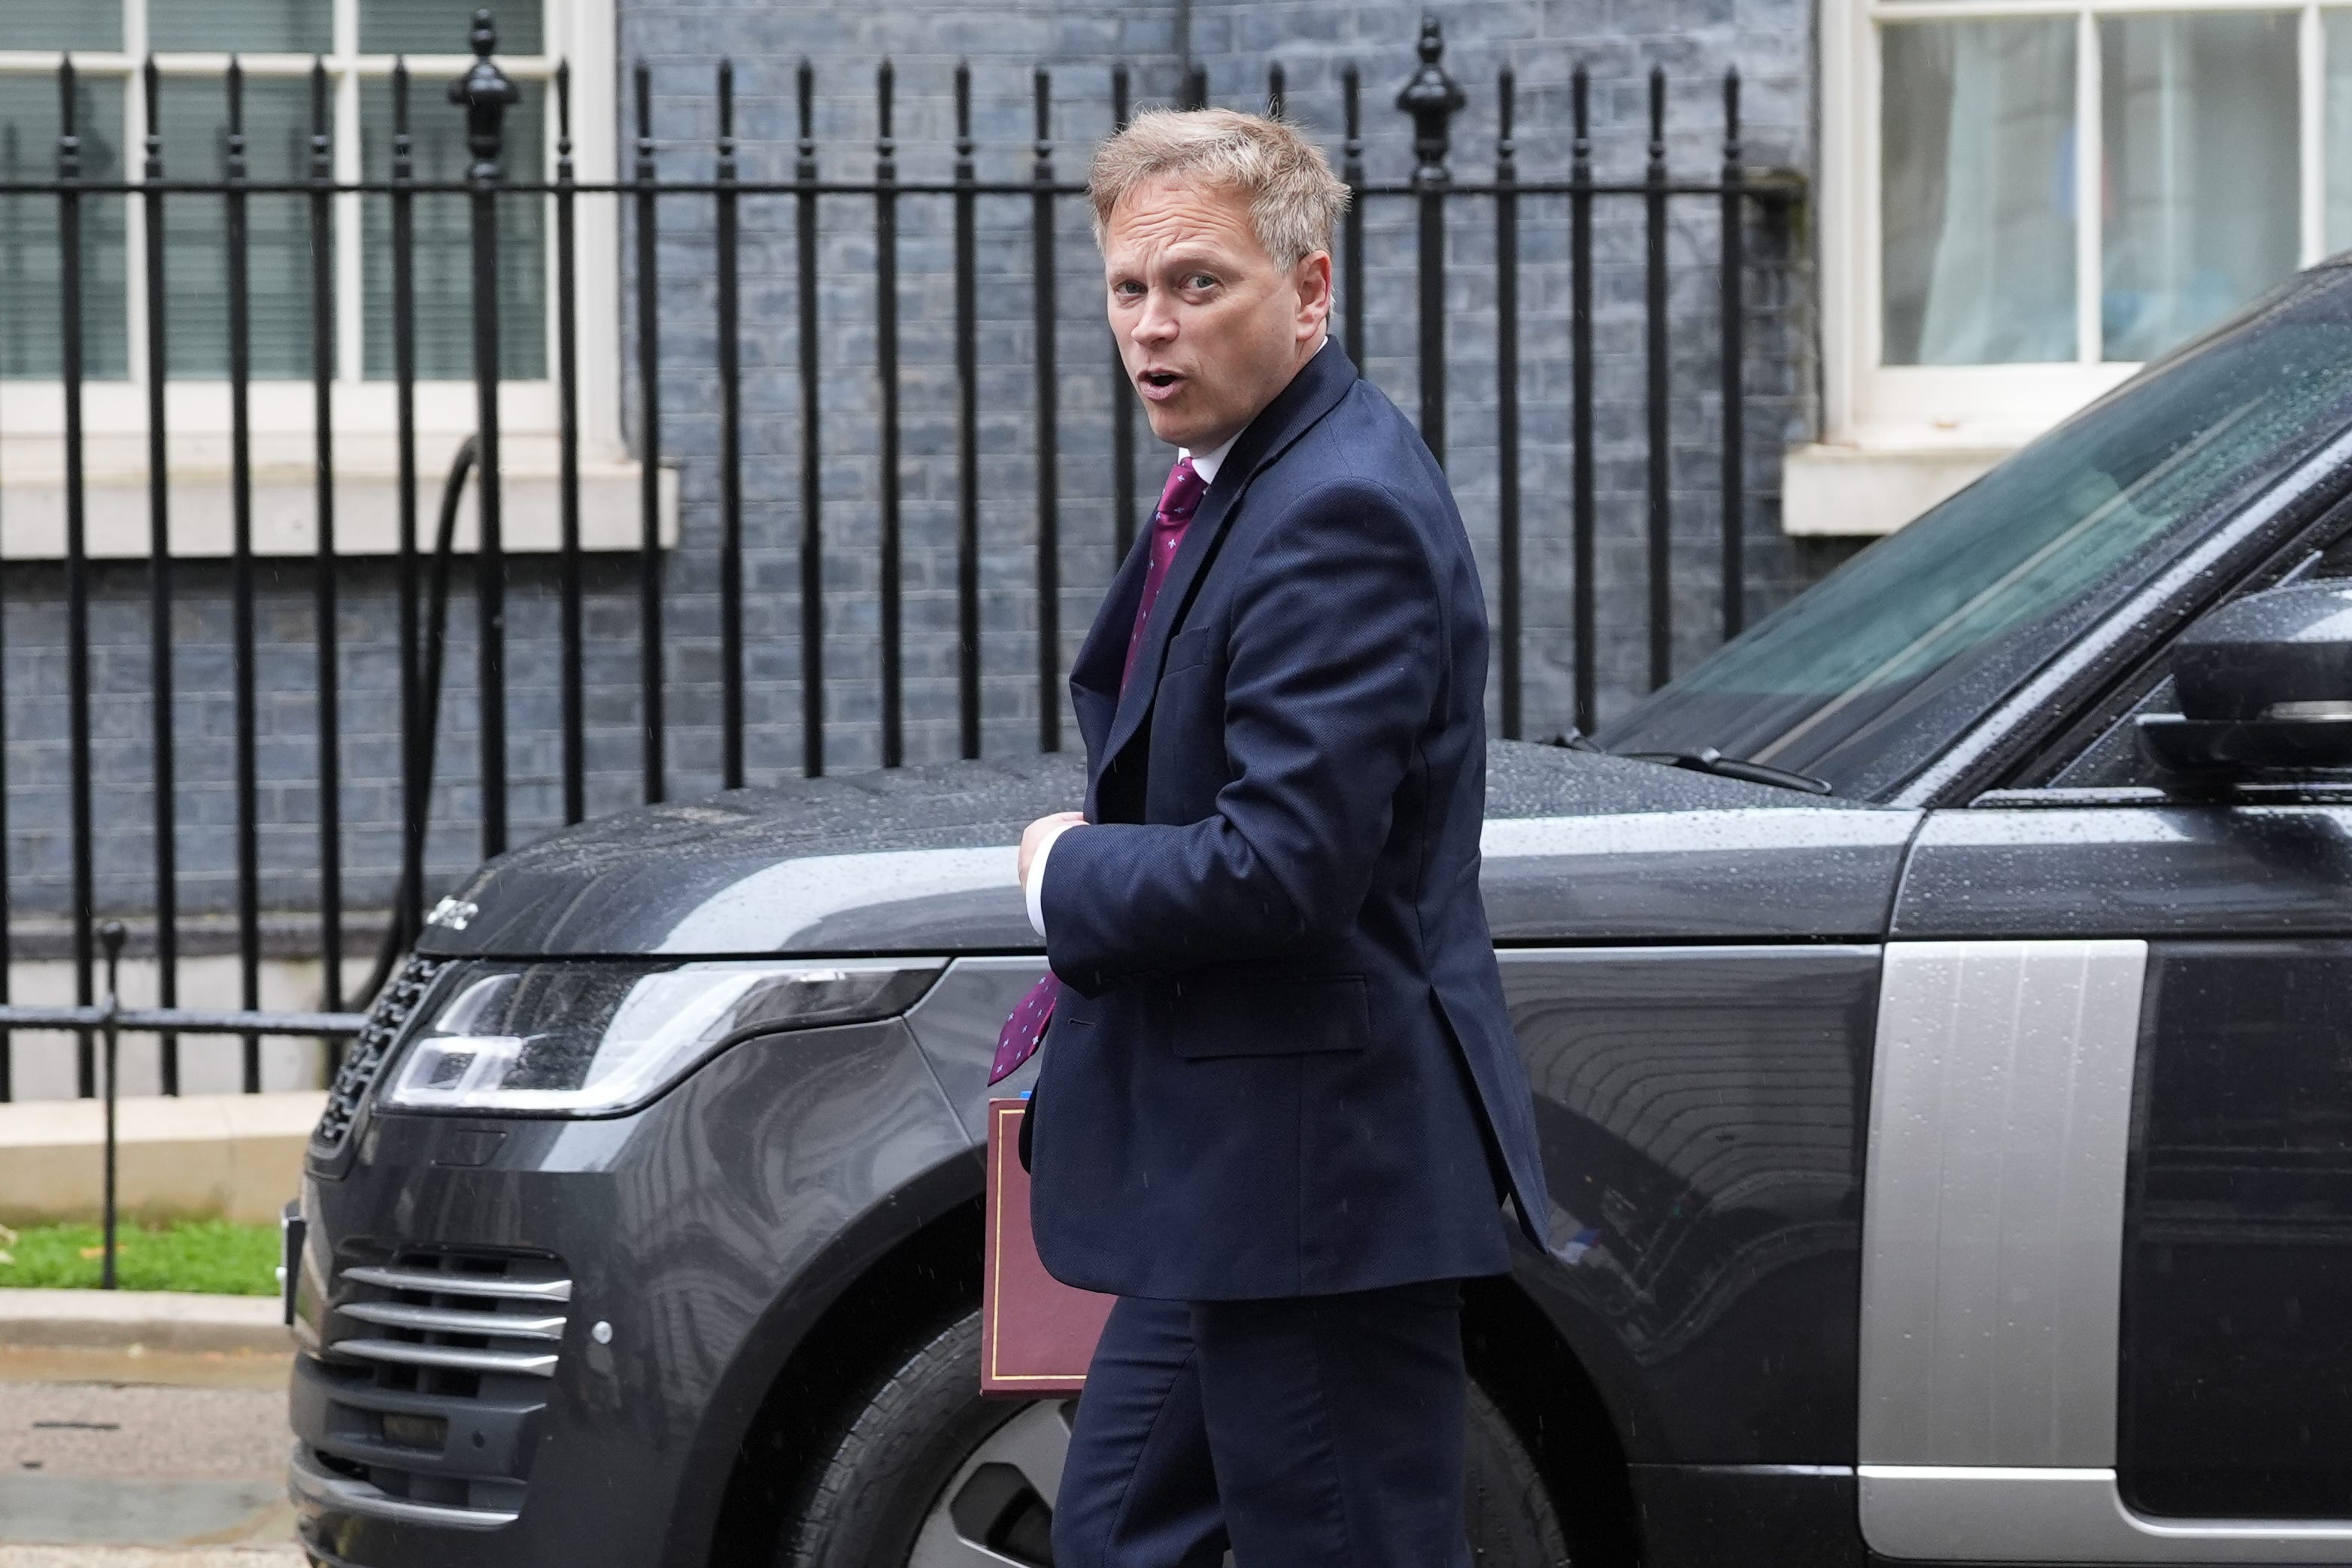 Grant Shapps is set to lose his Welwyn Hatfield seat to Labour, according to a new YouGov poll